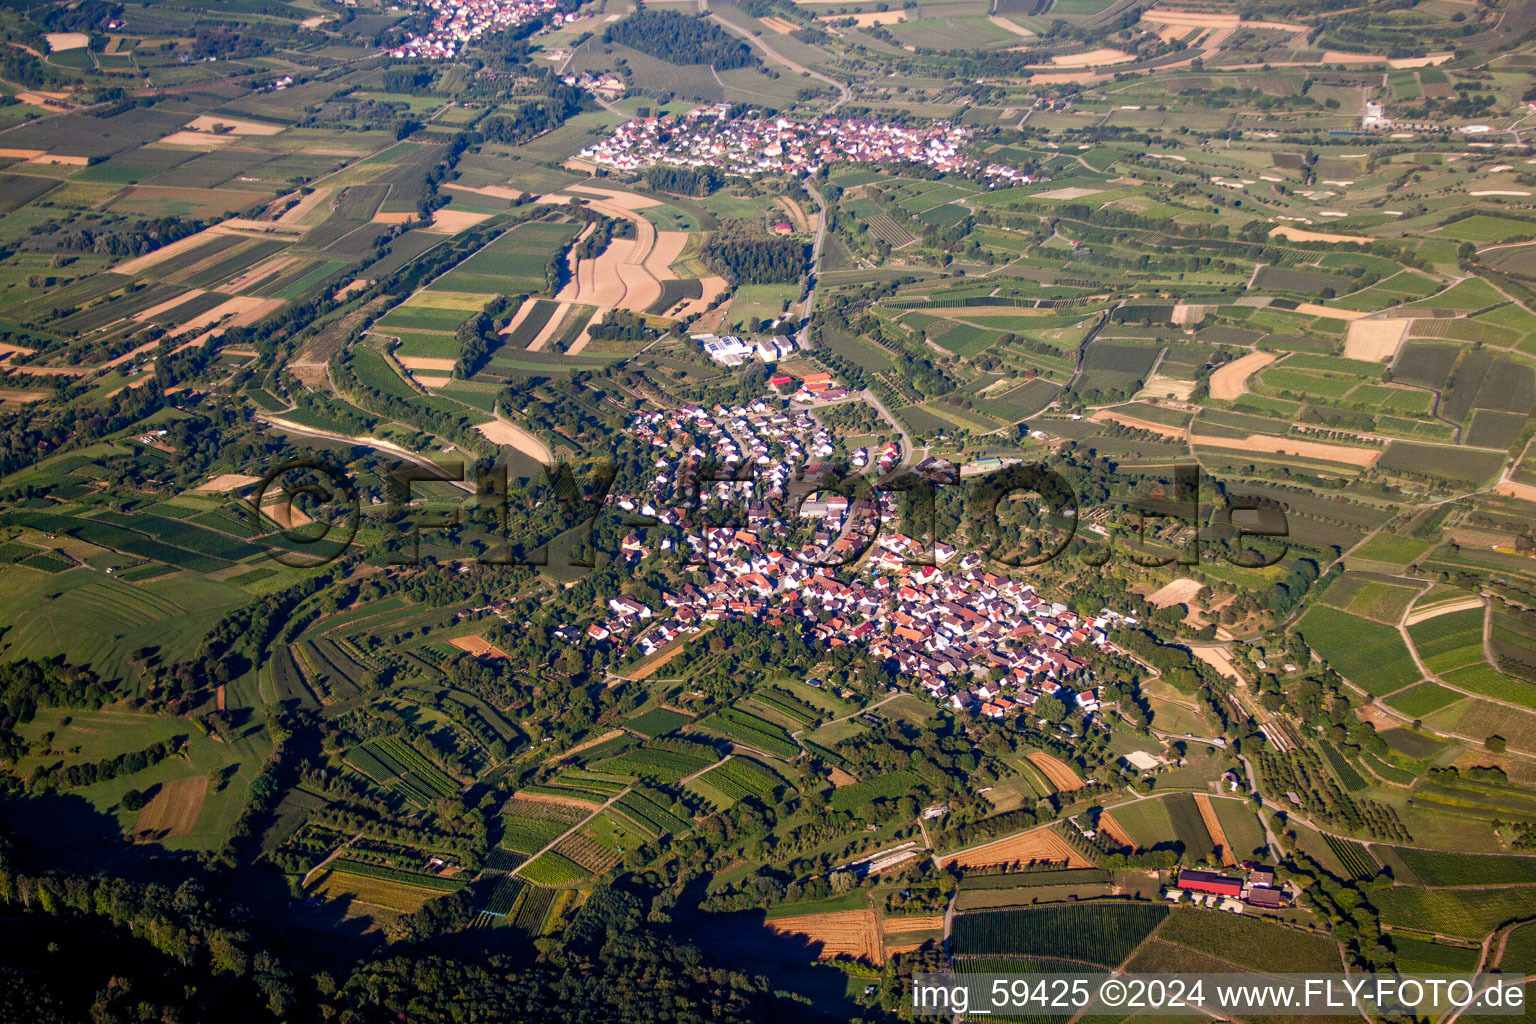 Village - view on the edge of agricultural fields and farmland in the district Broggingen in Herbolzheim in the state Baden-Wurttemberg, Germany